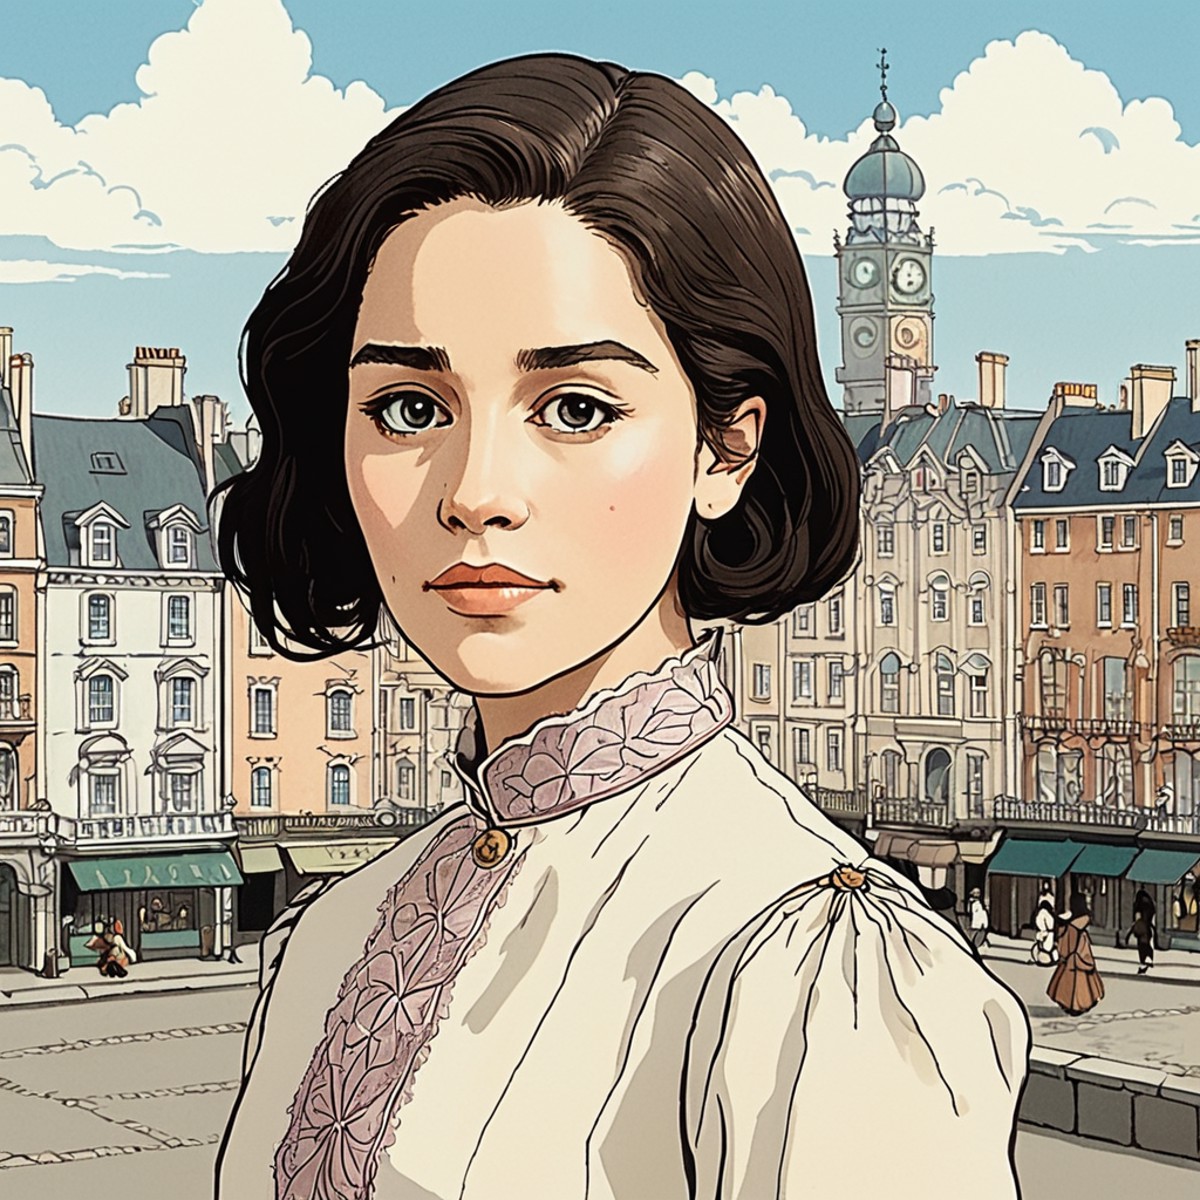 Studio ghibli style illustration of the face of a woman looking at the viewer with a victorian city square in the backgrou...